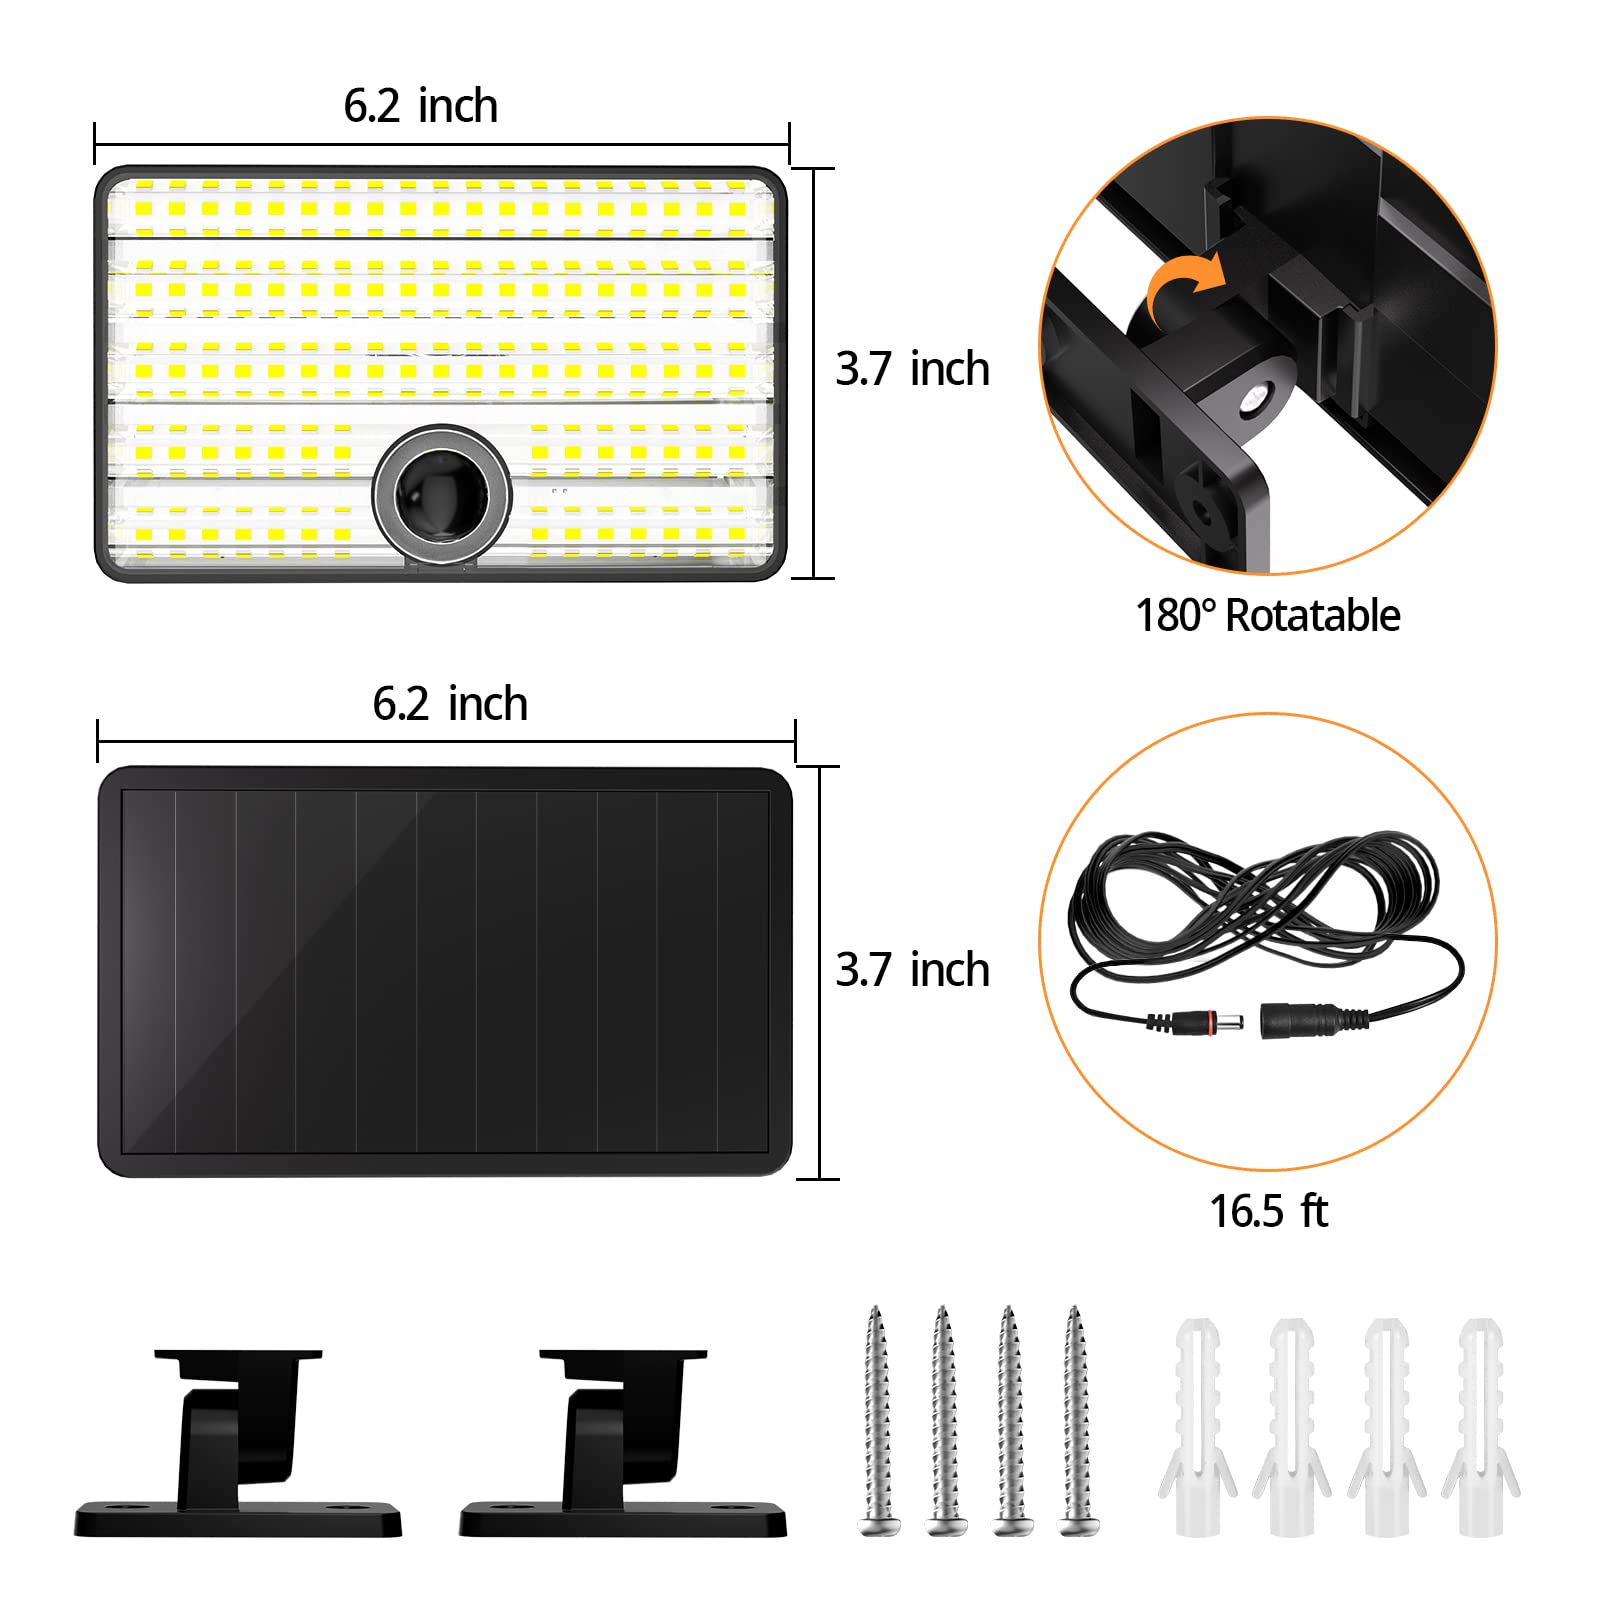 KERNOWO Solar Lights Outdoor, 85 LED 4000LM Security Lights, Solar Motion Sensor Lights with 16.4Ft Detachable Cable, IP65 Waterproof Wall Lights 3 Modes for Outside,Garage, Entryways, 2Pack